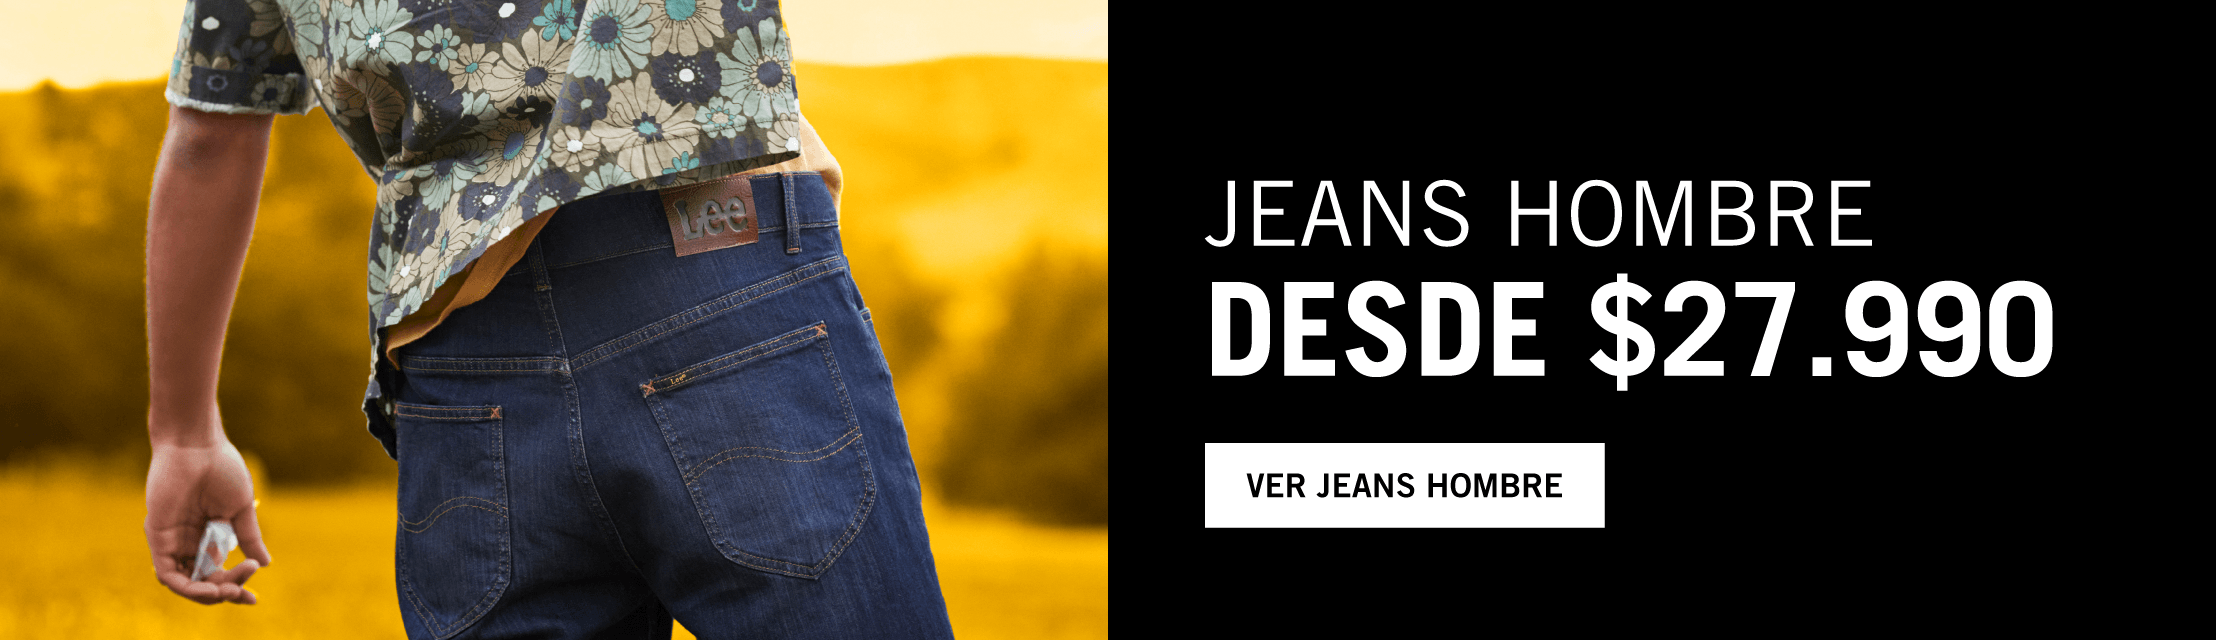 Lee jeans Chile